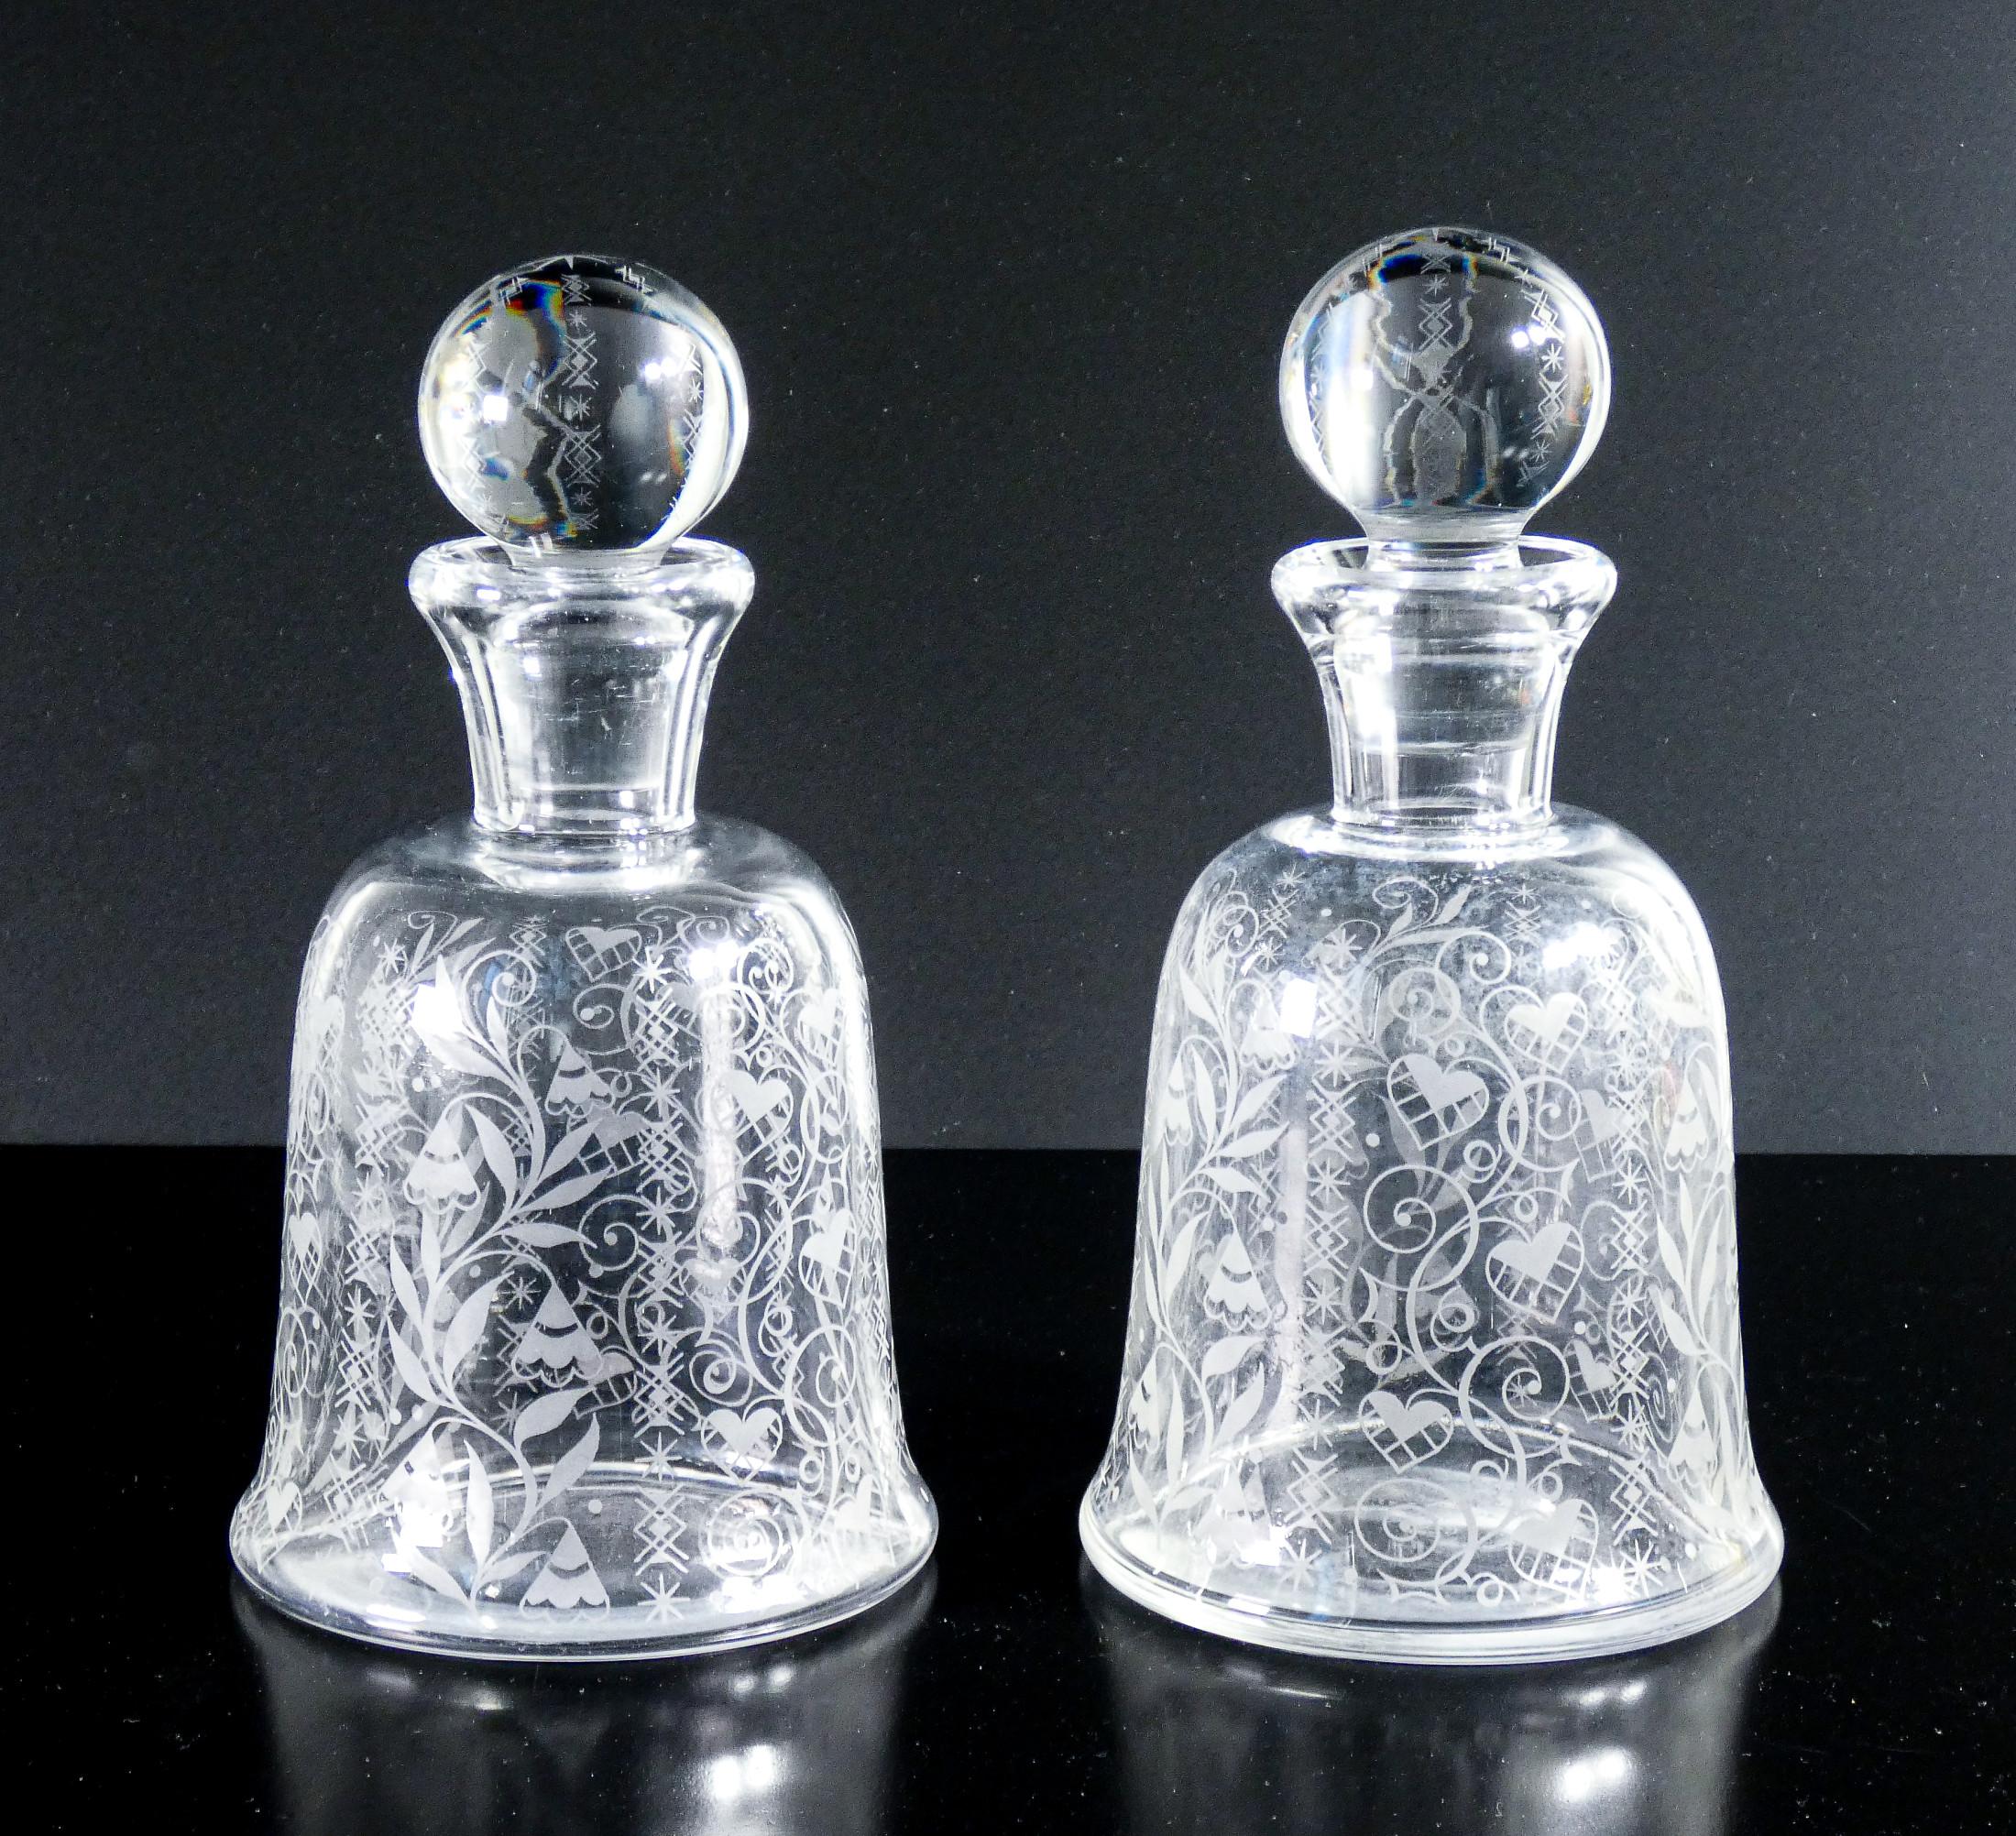 Pair of bottles
crystal BACCARAT,
i was dying Argentina.

ORIGIN
France

PERIOD
1940s

MARK
Baccarat
France

MODEL
Bottles decorated with
the reason Argentina

MATERIALS
Crystal

DIMENSIONS
H 24 cm
Ø 13 cm

CONDITIONS
The pieces are in excellent